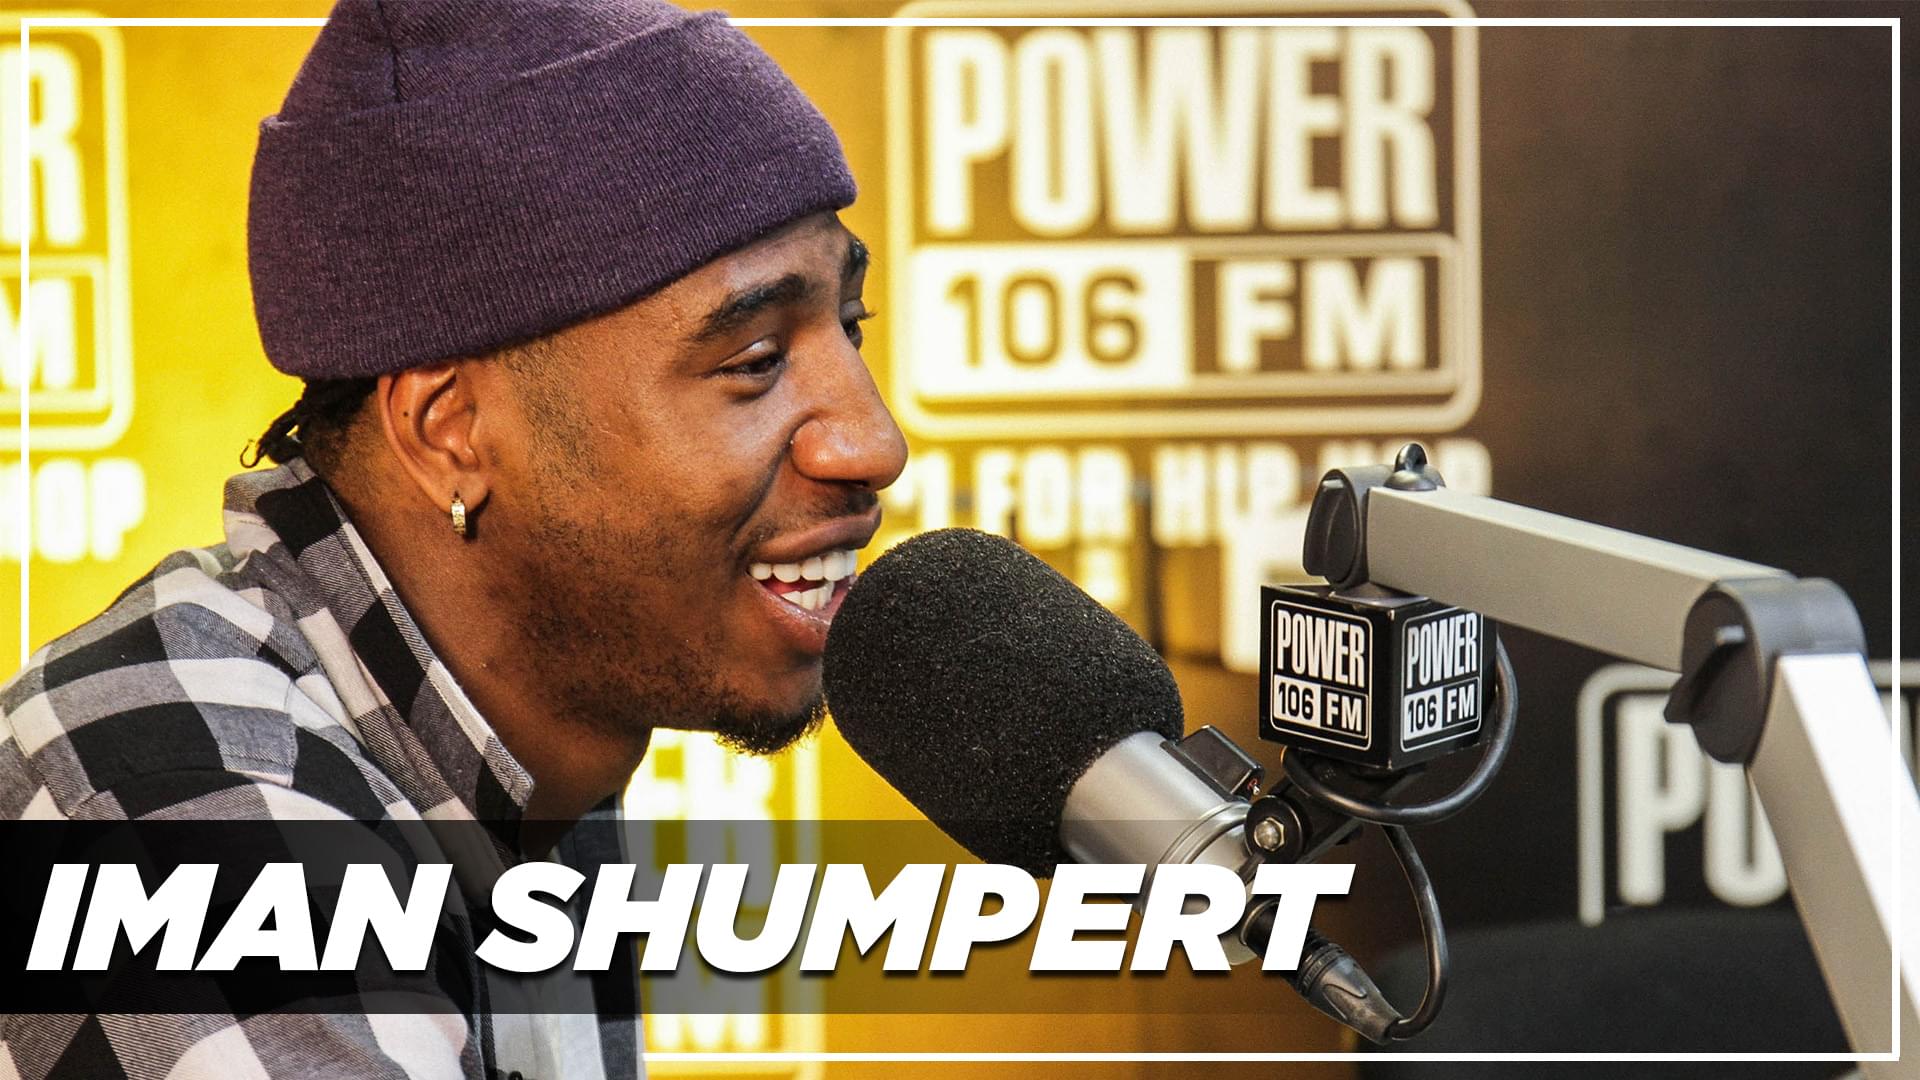 Iman Shumpert On Getting Curved By Teyana Taylor, Kanye’s New Album & Making Angry Music!